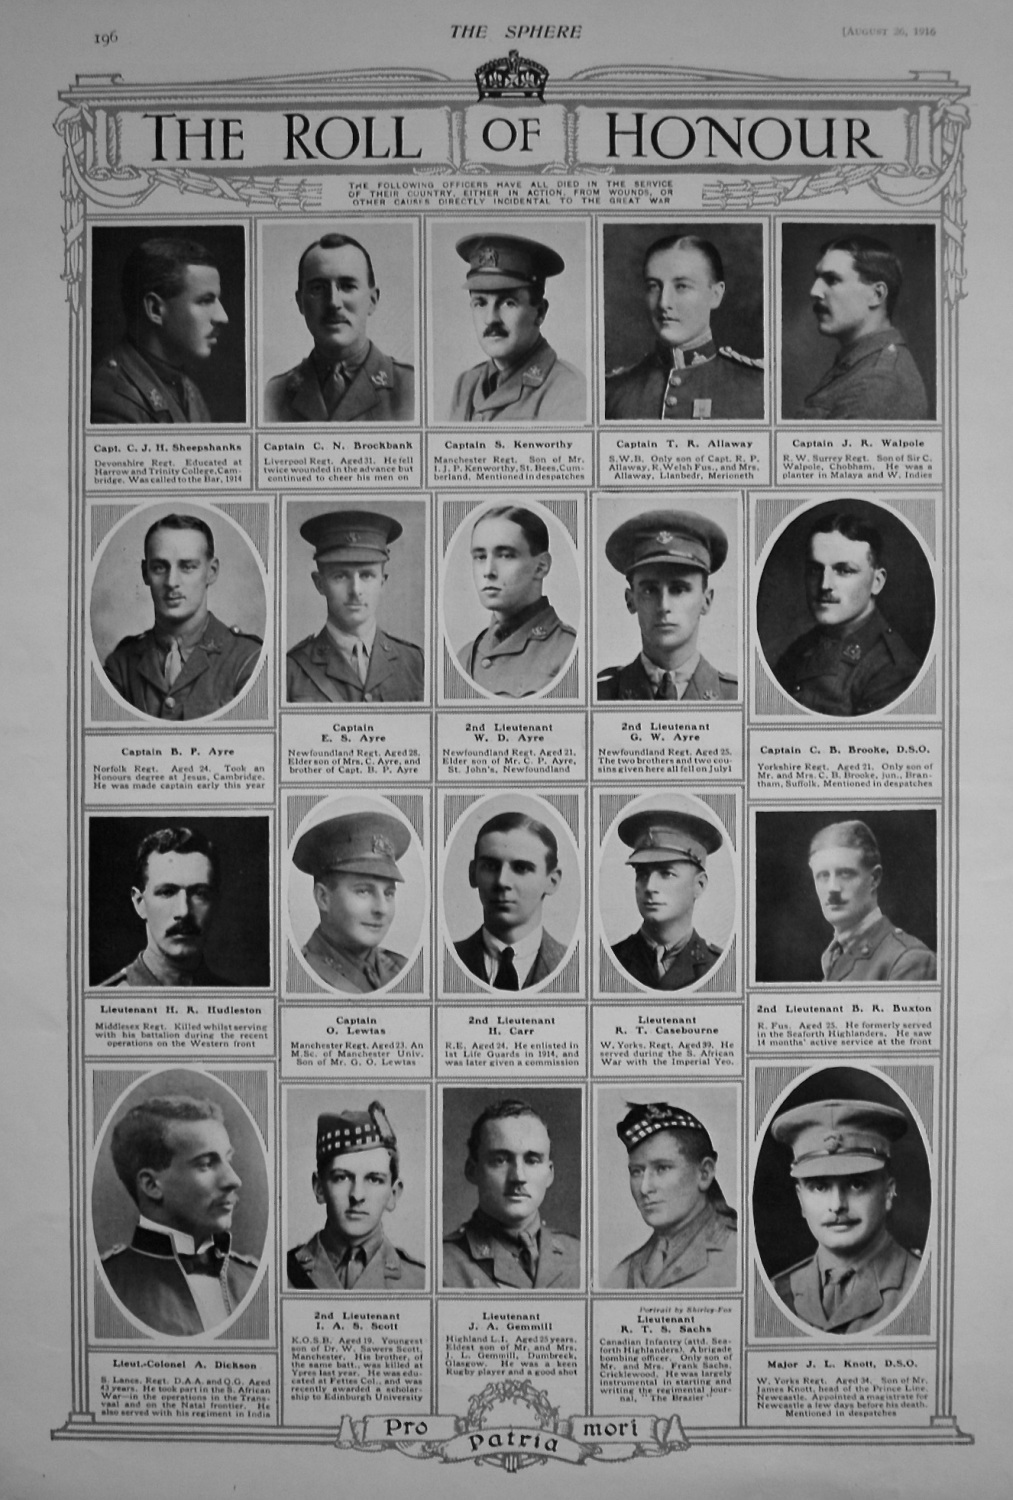 The Roll of Honour. August 26th, 1916.